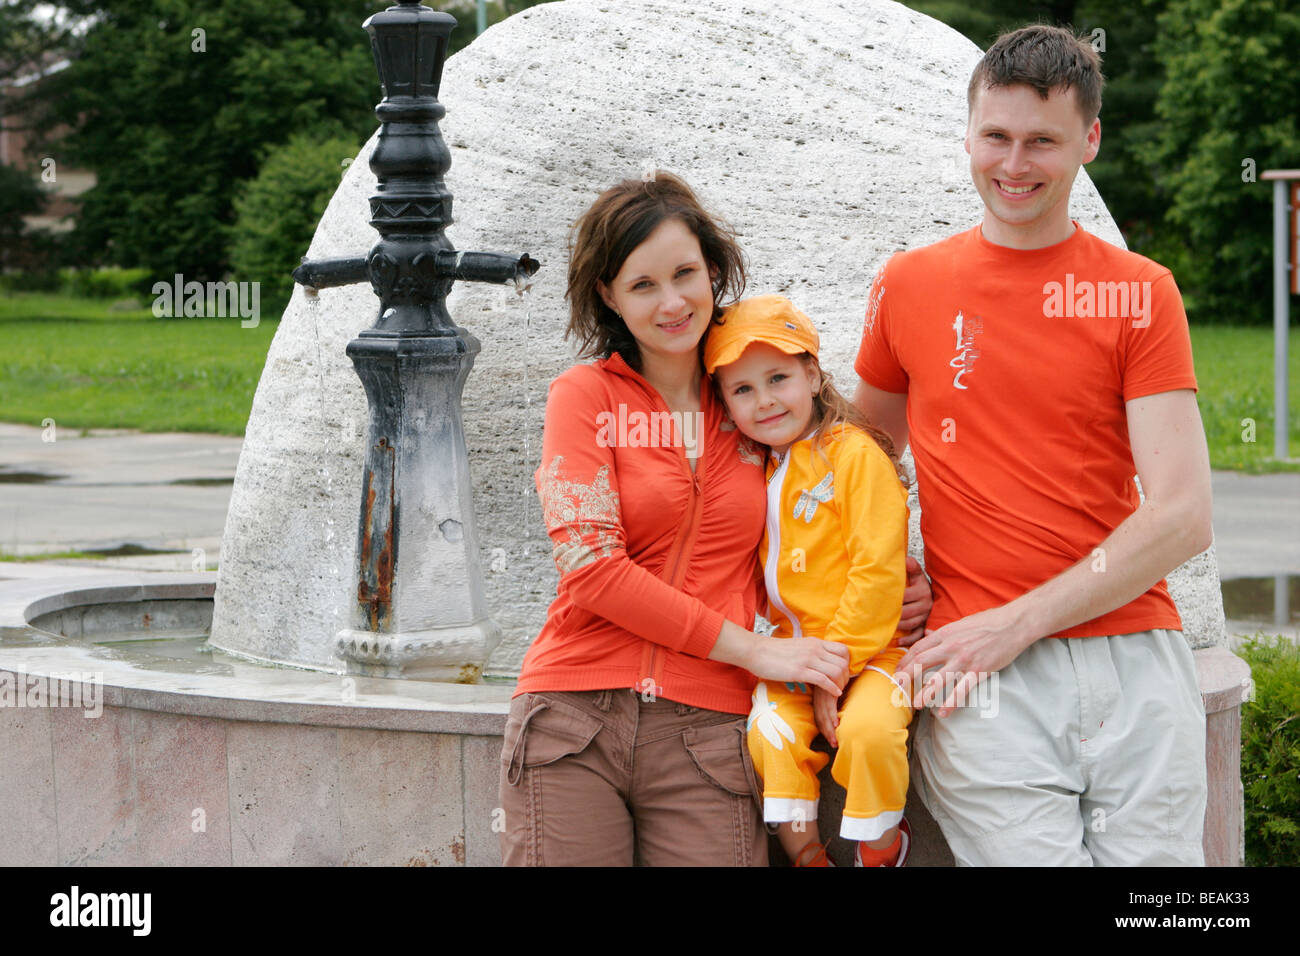 Family with one child standing at fountain. Stock Photo